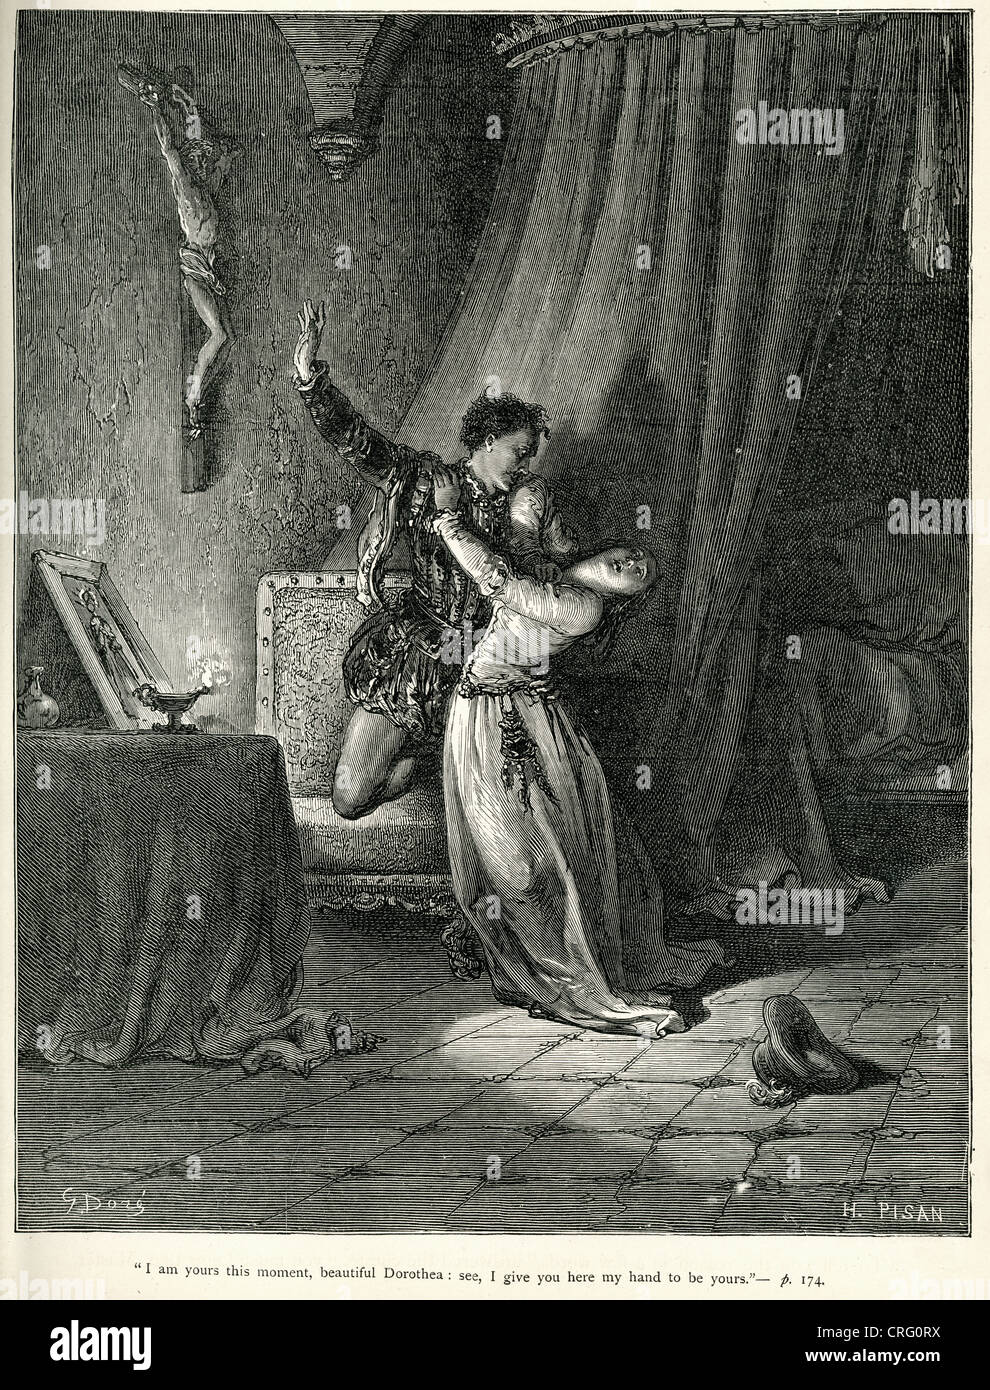 Hitting the Beautiful Dorothea. Illustration by Gustave Dore from Don ...